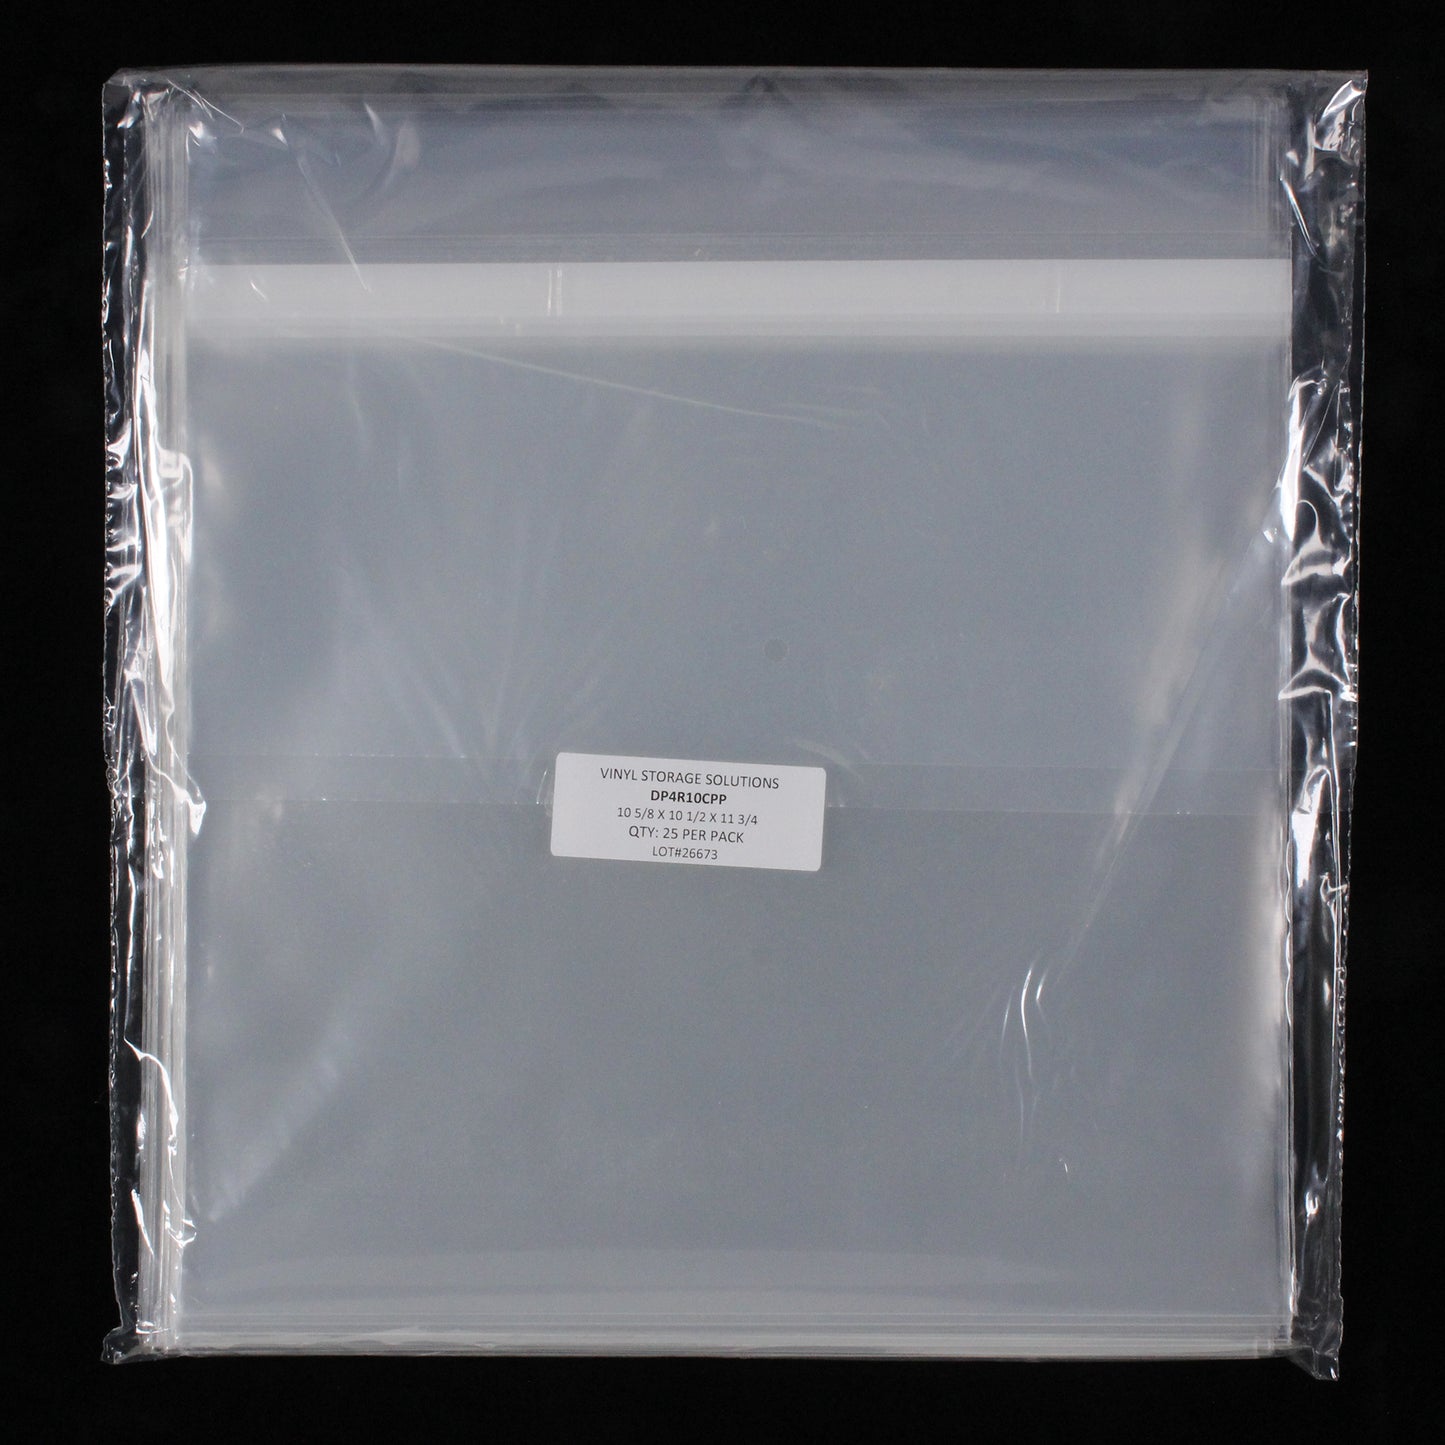 10" Dual Pocket Outer Sleeves w/ Sealable Flap - 4mil (25 pack) - Vinyl Storage Solutions